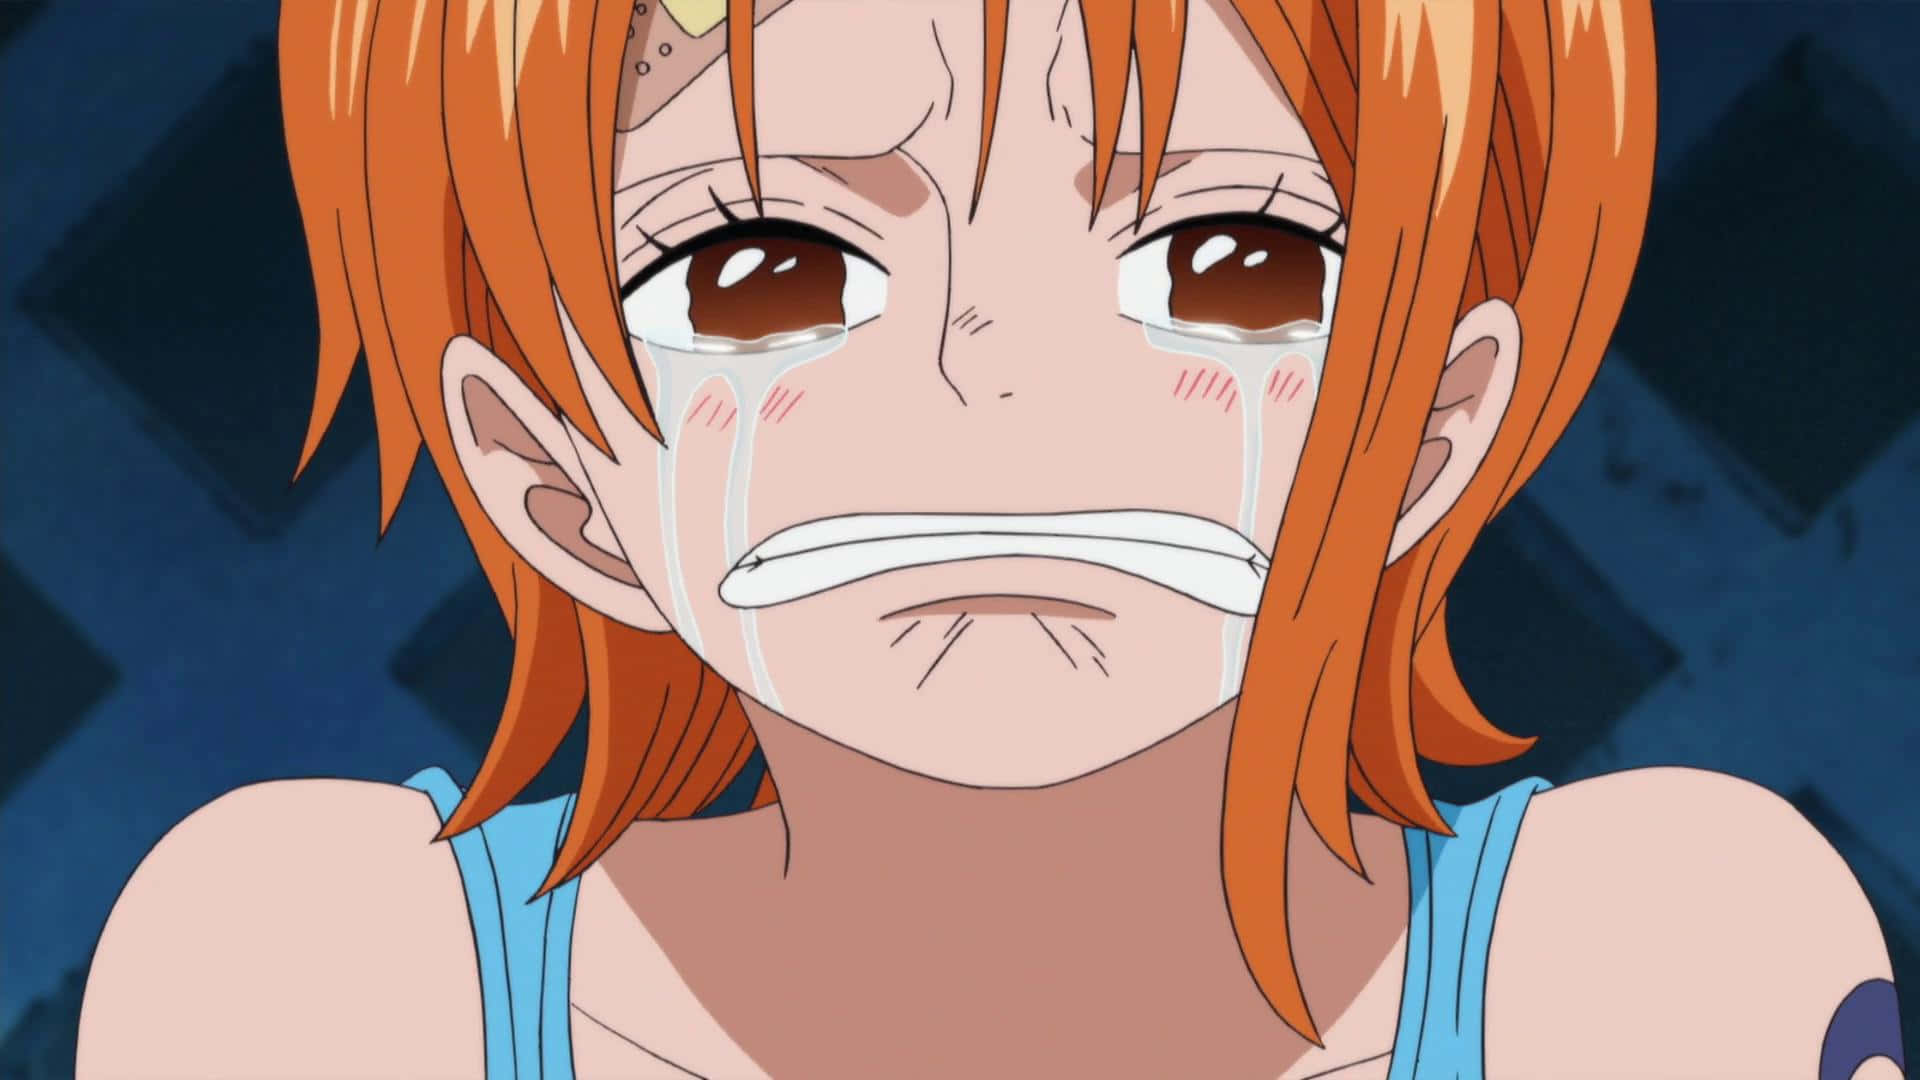 A Girl With Orange Hair Is Crying